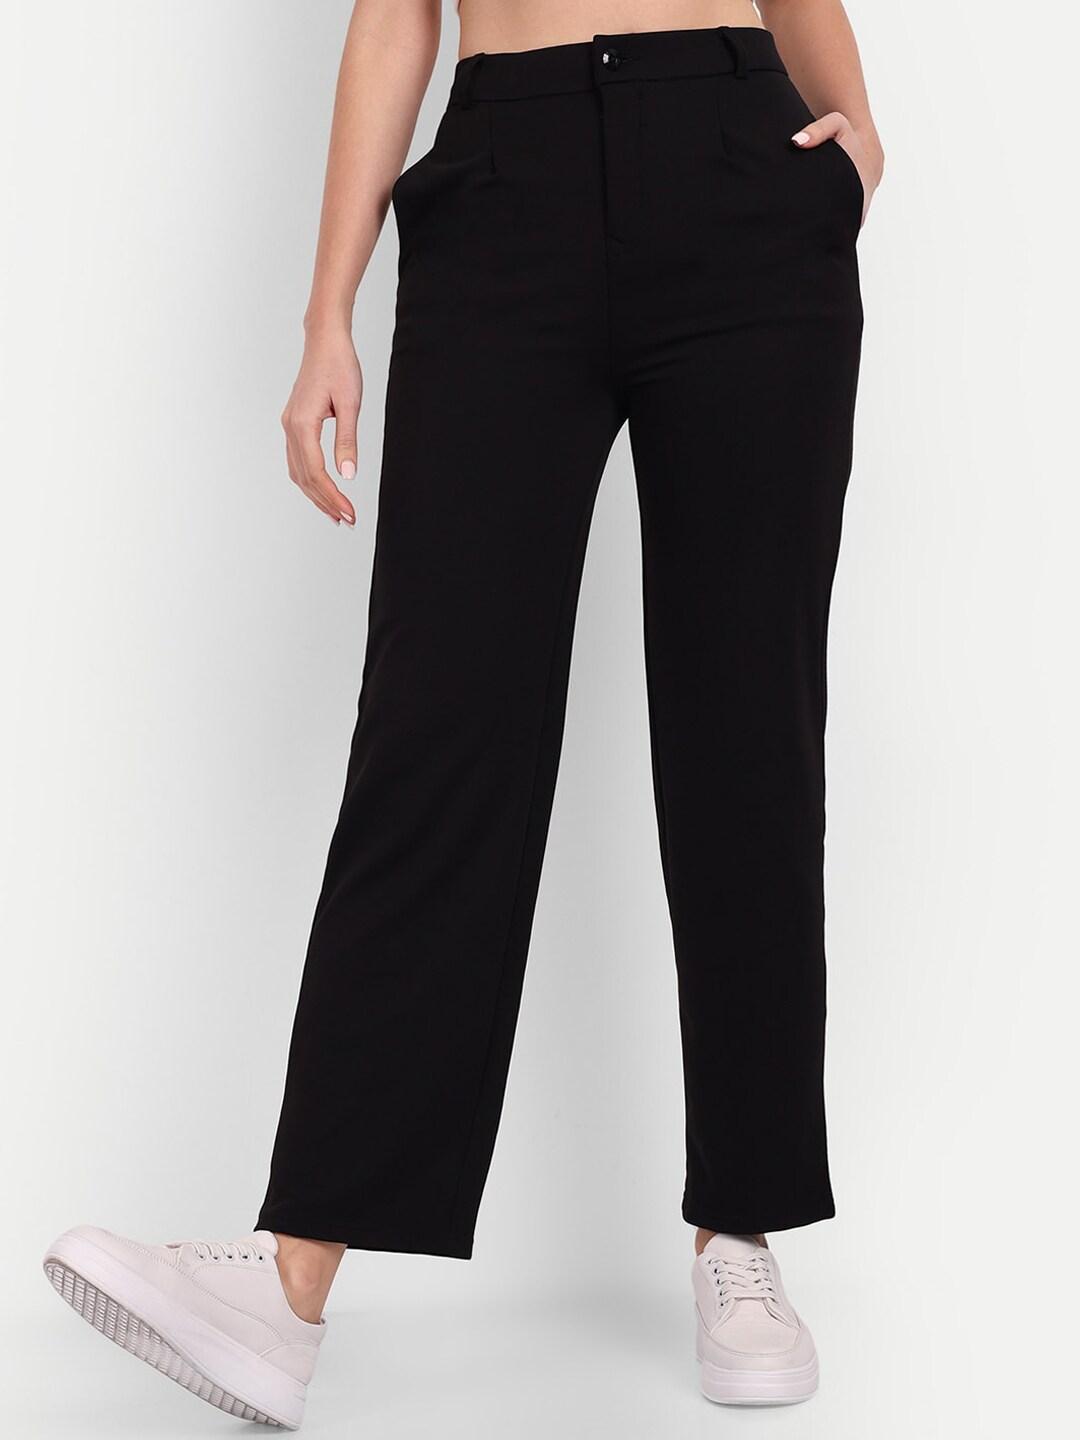 Next One Women Tailored Straight Fit High-Rise Easy Wash Trousers